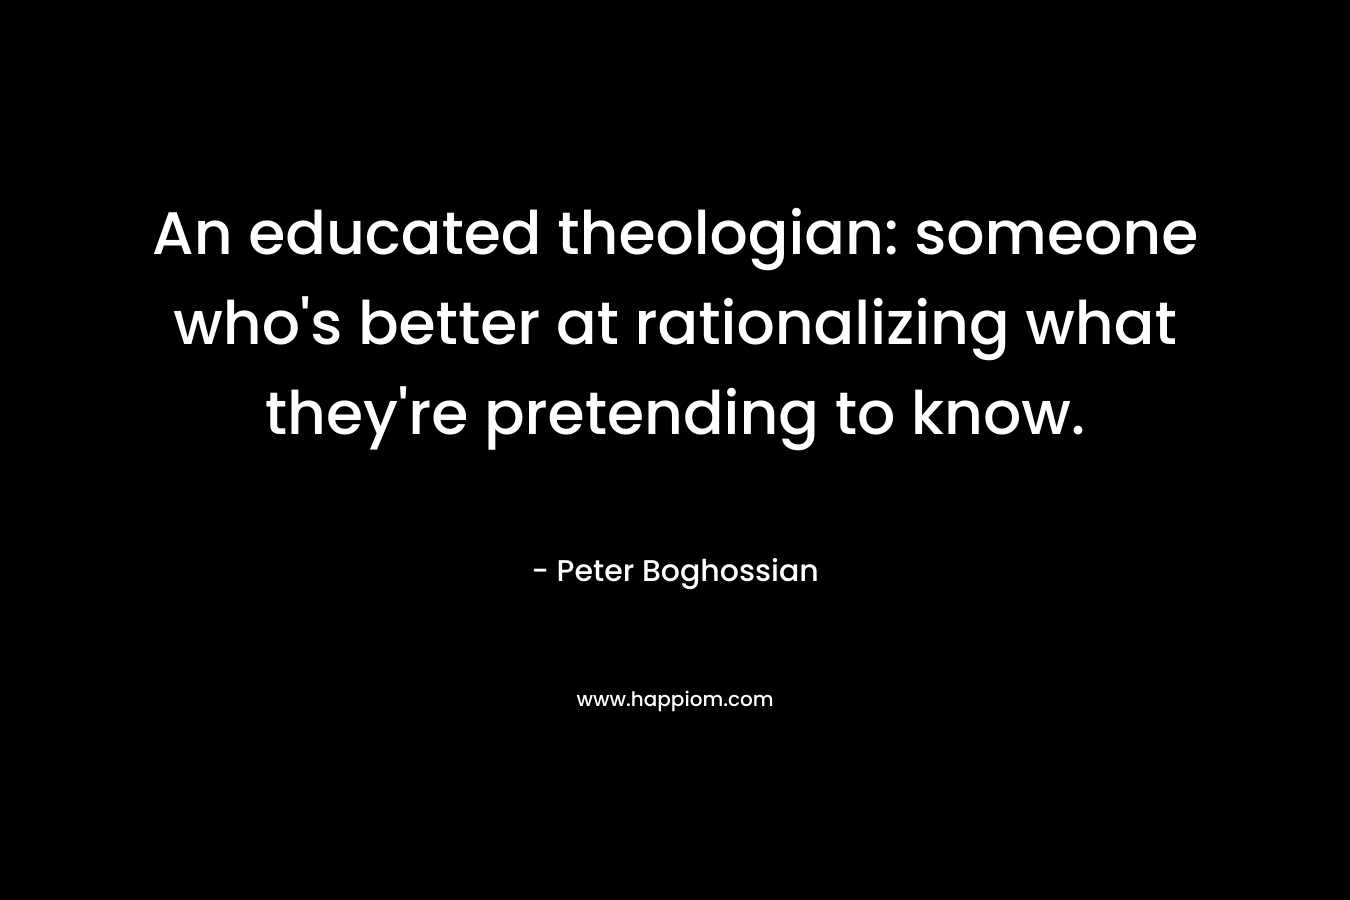 An educated theologian: someone who’s better at rationalizing what they’re pretending to know. – Peter Boghossian